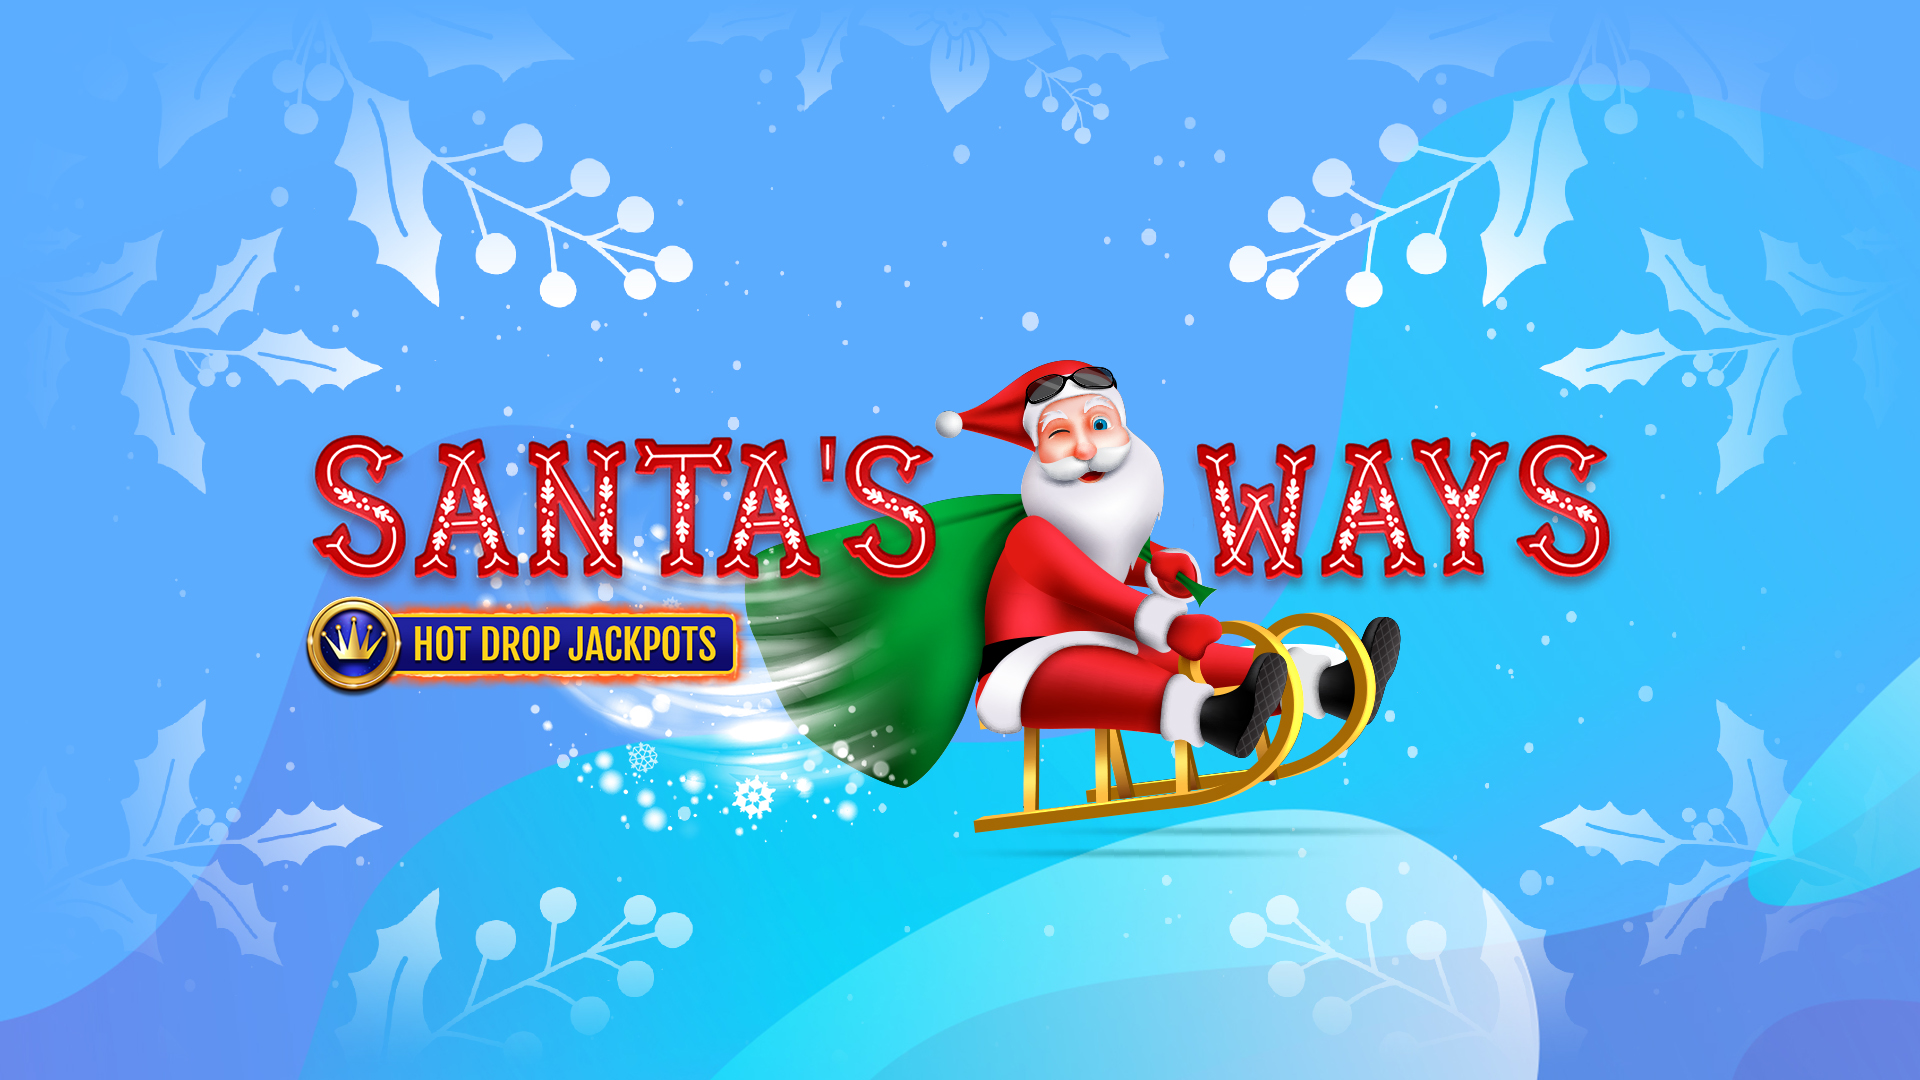 Santa Claus is on a golden sleigh flying through the sky, wearing a green cape and red hat with sunglasses pulled up, winking, while the SlotsLV slot game logo from “Santa’s Ways” surrounds him.